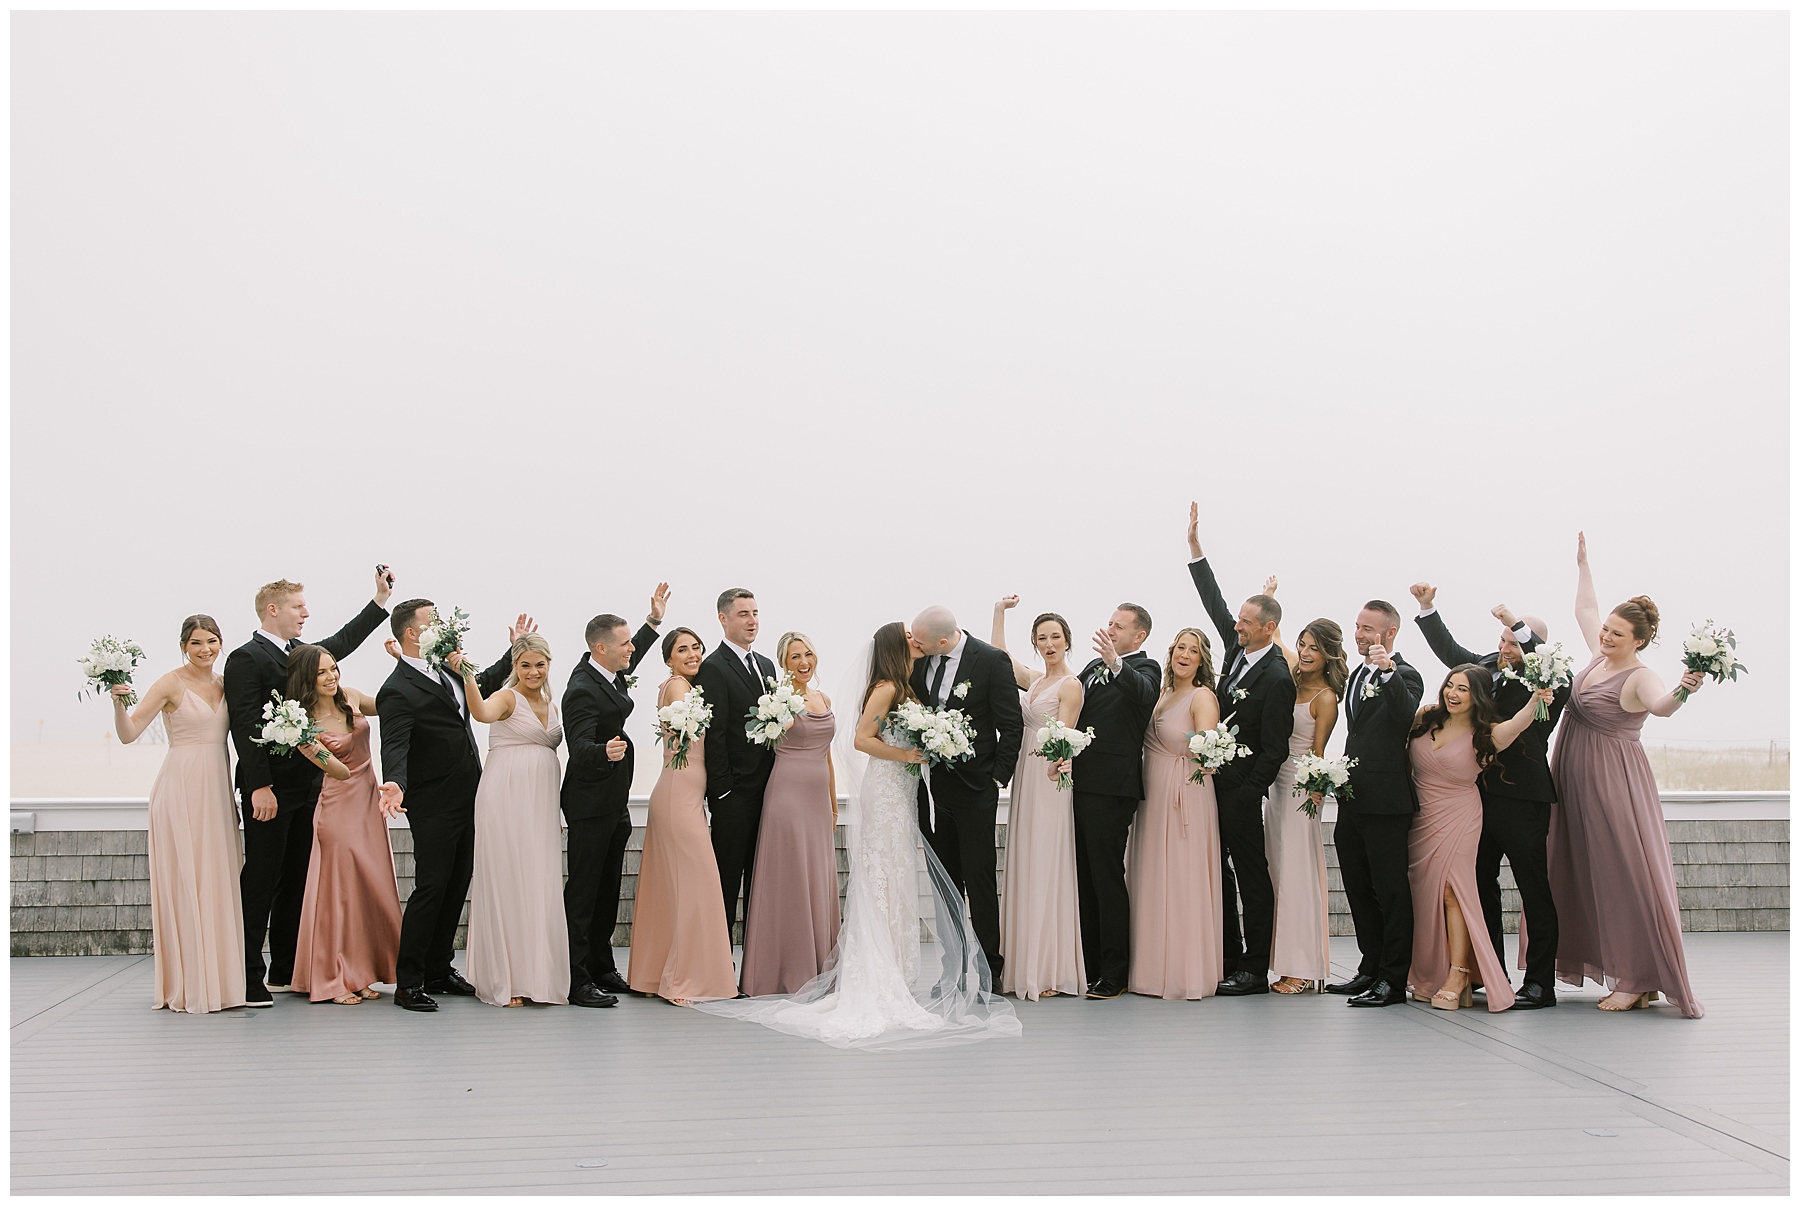 wedding party celebrates during portraits from Cape Cod wedding at Wychmere Beach Club 